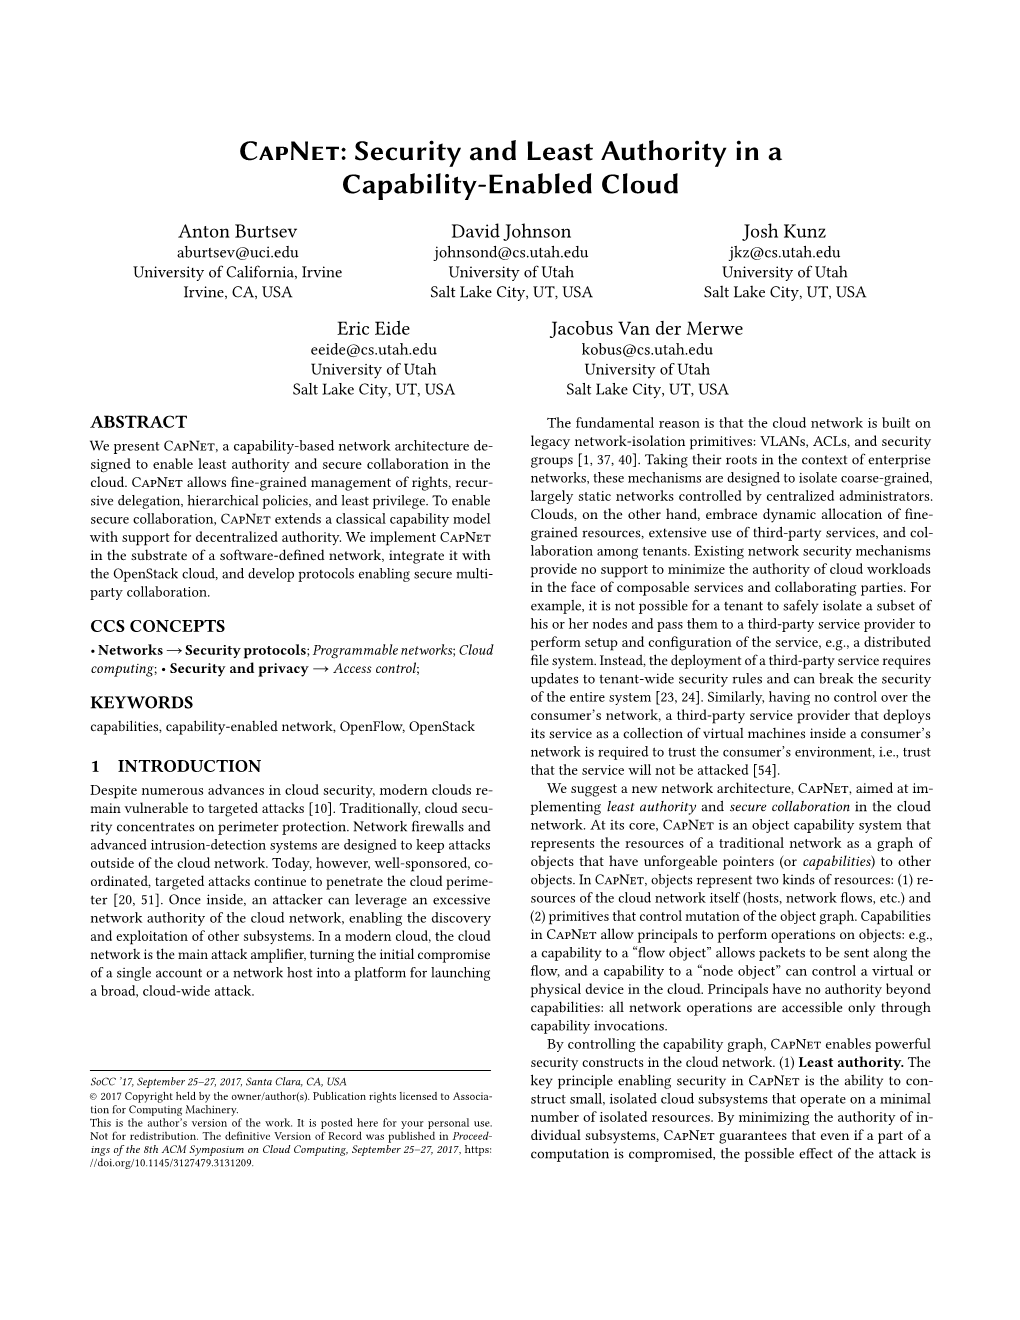 Security and Least Authority in a Capability-Enabled Cloud